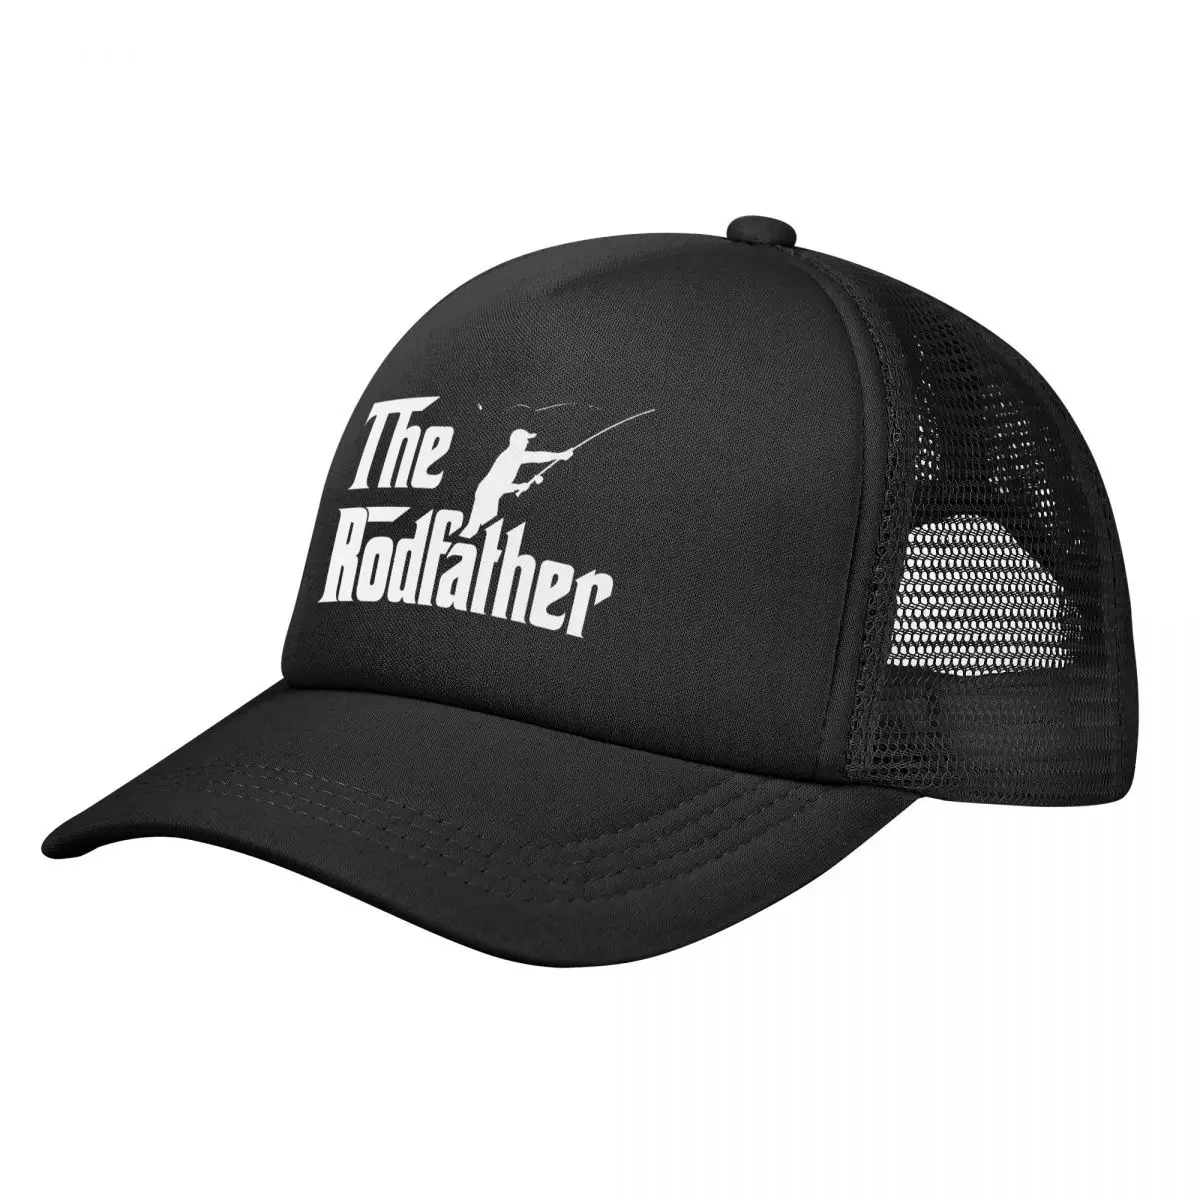 

The Rodfather Graphic Hunting Stretchy Trucker Hat Mesh Baseball Cap Snapback Closure Hats for Men Women Comfortable Breathable